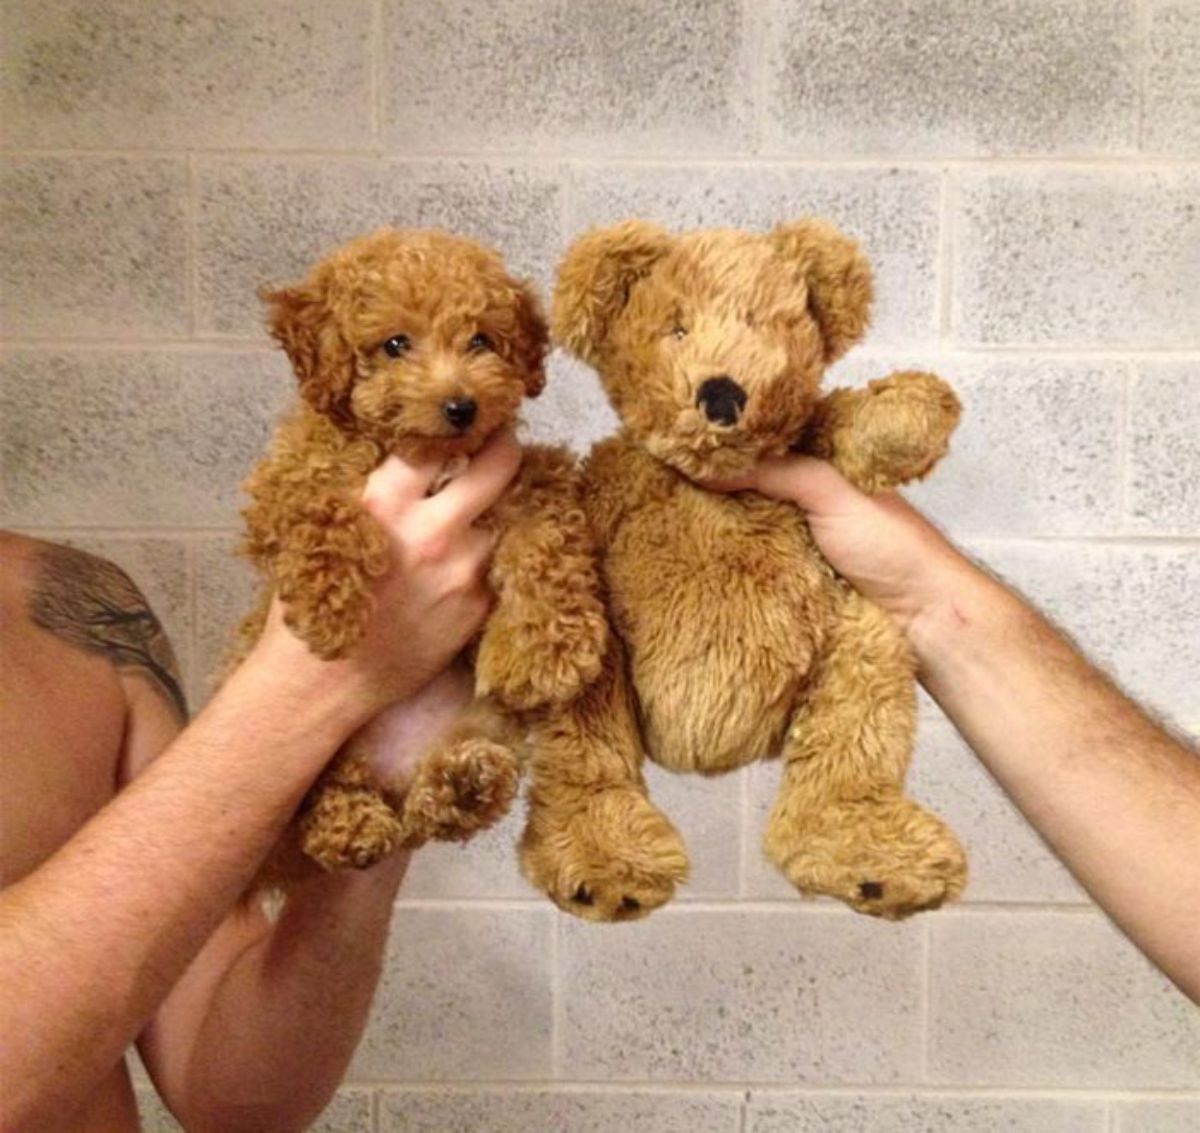 brown poodle puppy held up next to a brown teddy bear